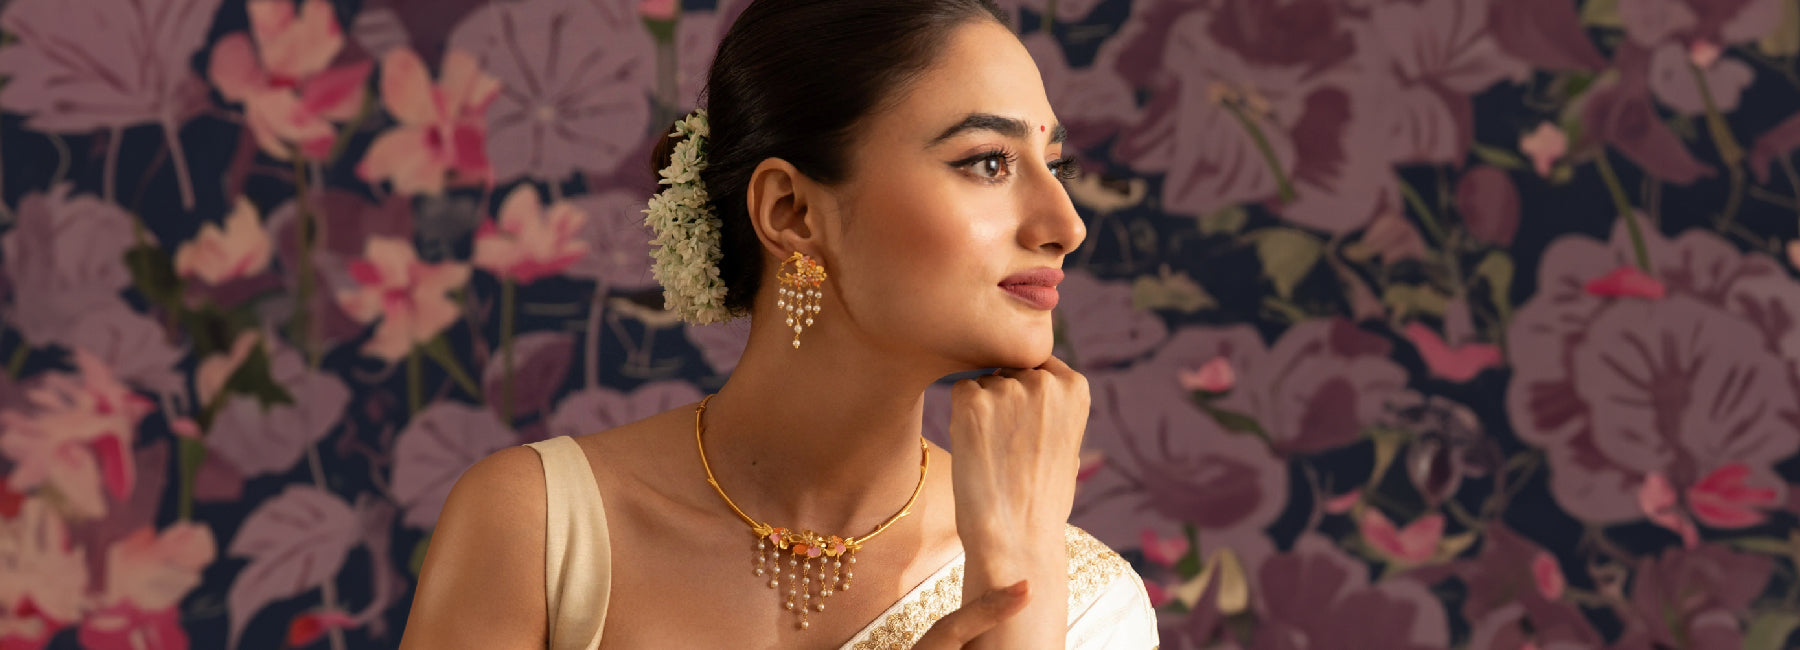 How to Make a Statement with Subtle Indian Necklaces